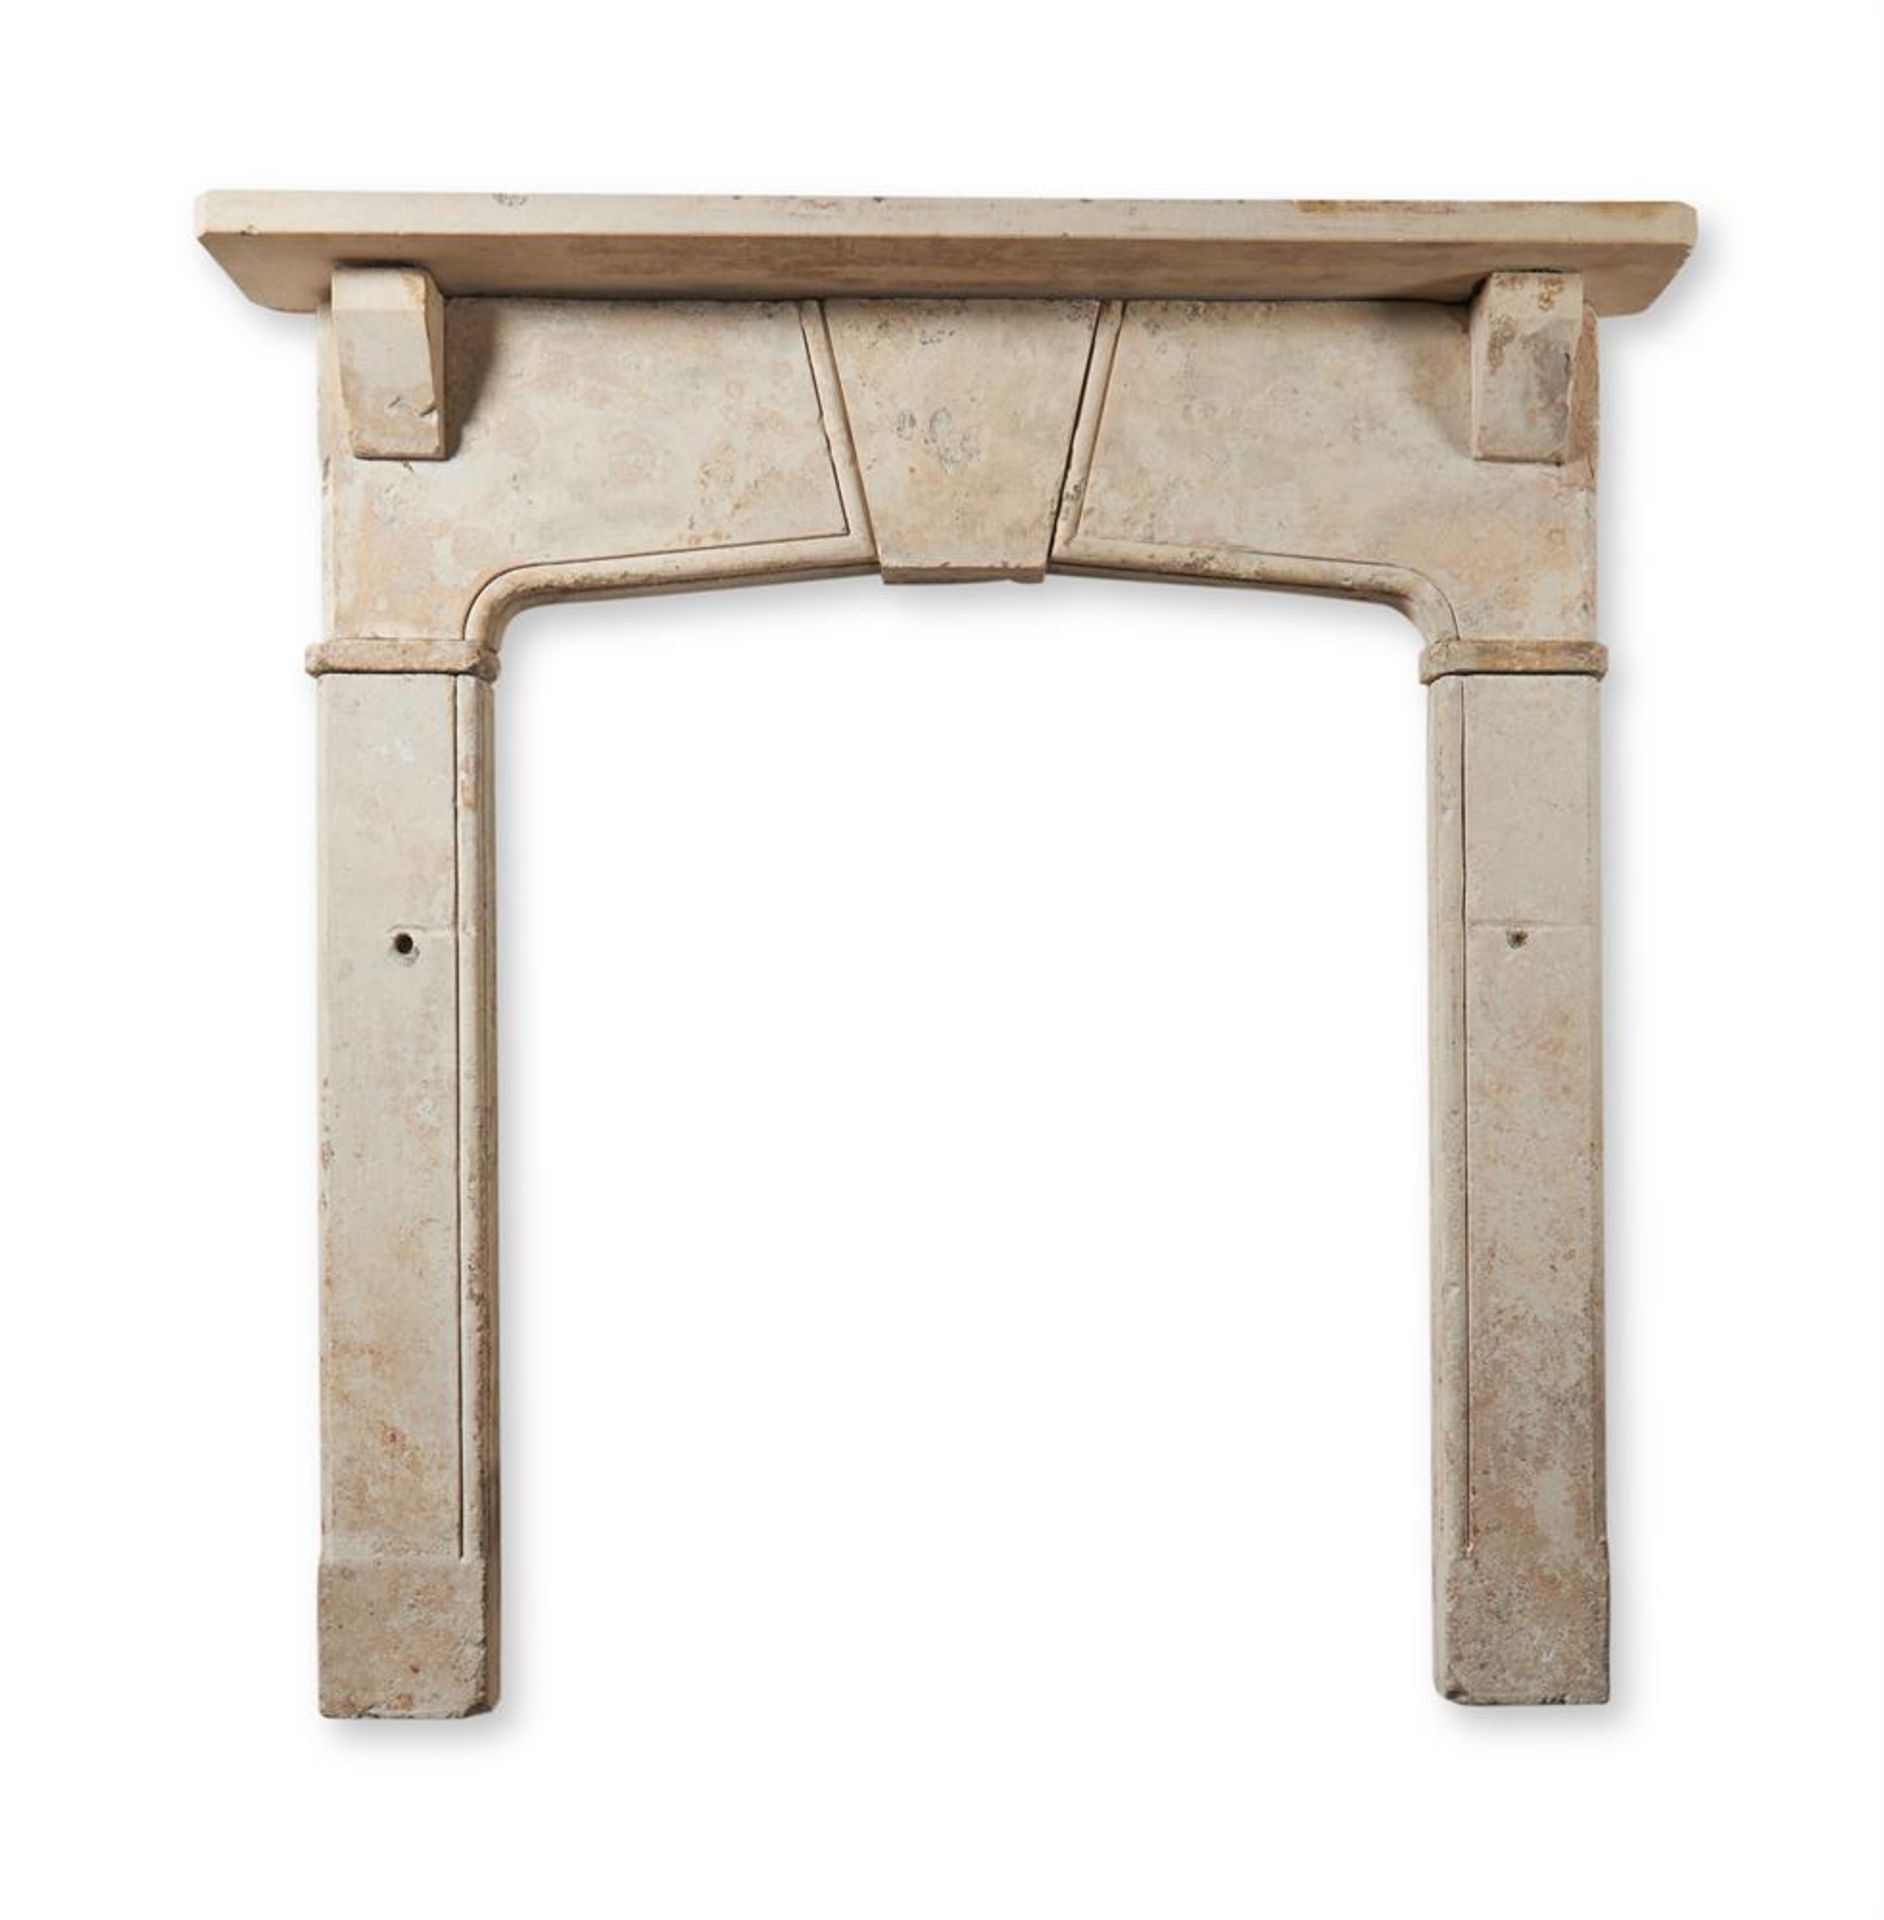 A LIMESTONE FIRE SURROUND, FRENCH, POSSIBLY EARLY 19TH CENTURY - Image 3 of 3